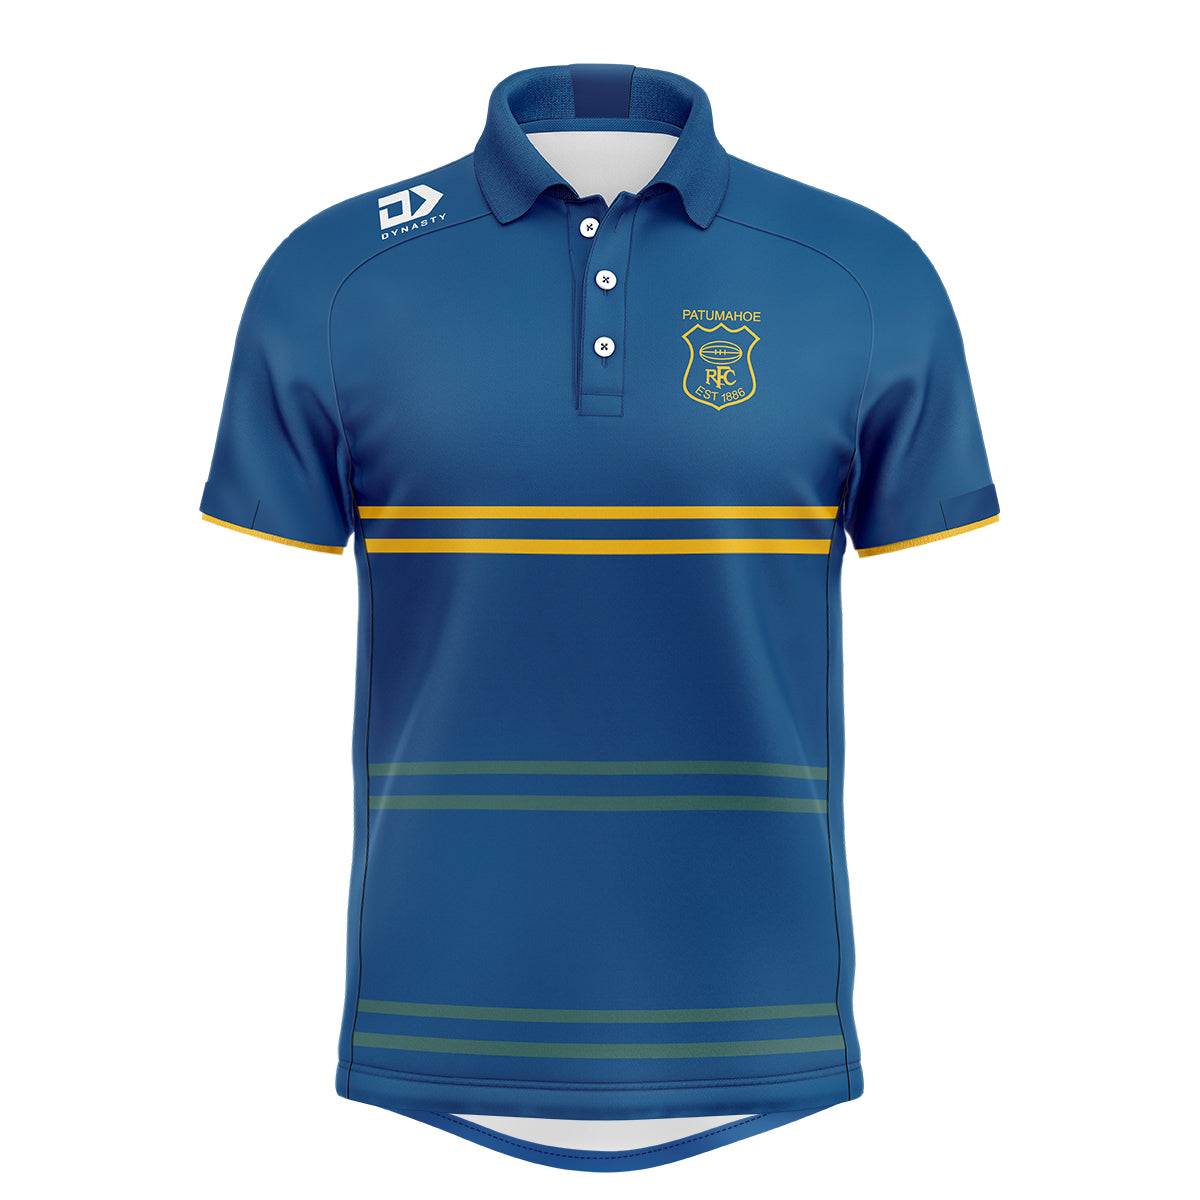 Patumahoe Rugby Football Club (Bespoke Items) - Dynasty Team Store NZ